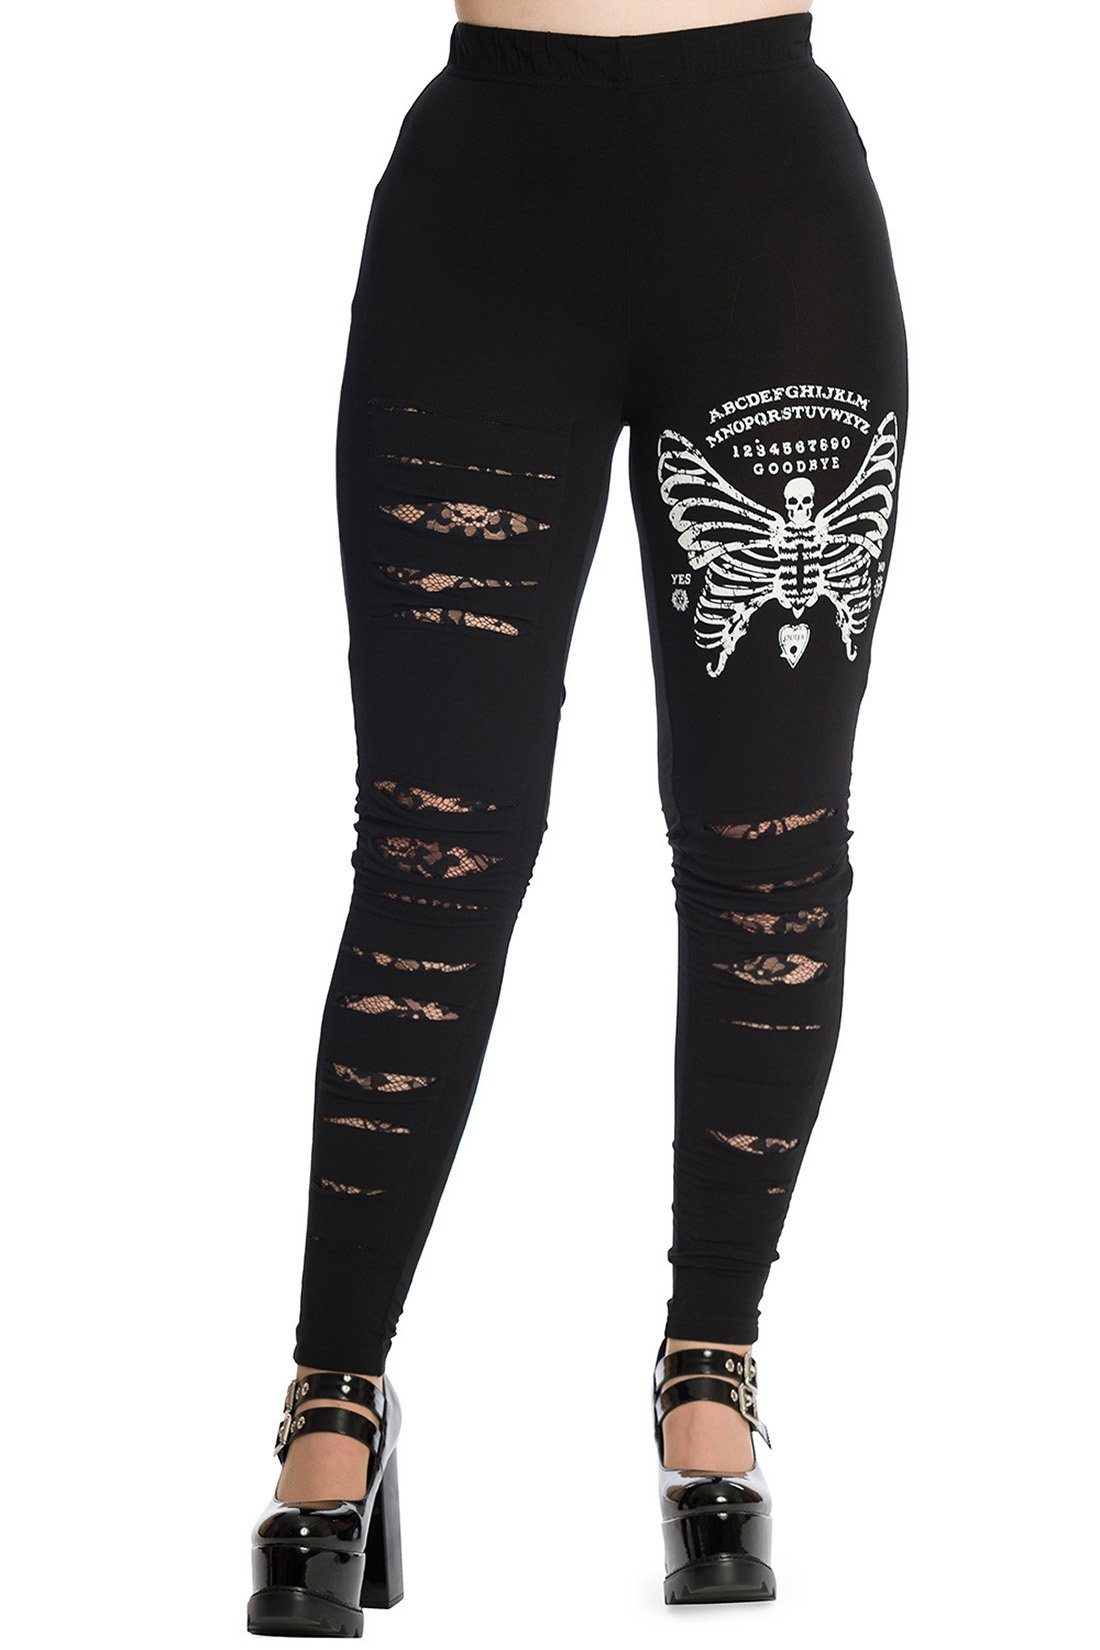 Banned Леггинсы Skeleton Butterfly Gothic Distressed Spitze